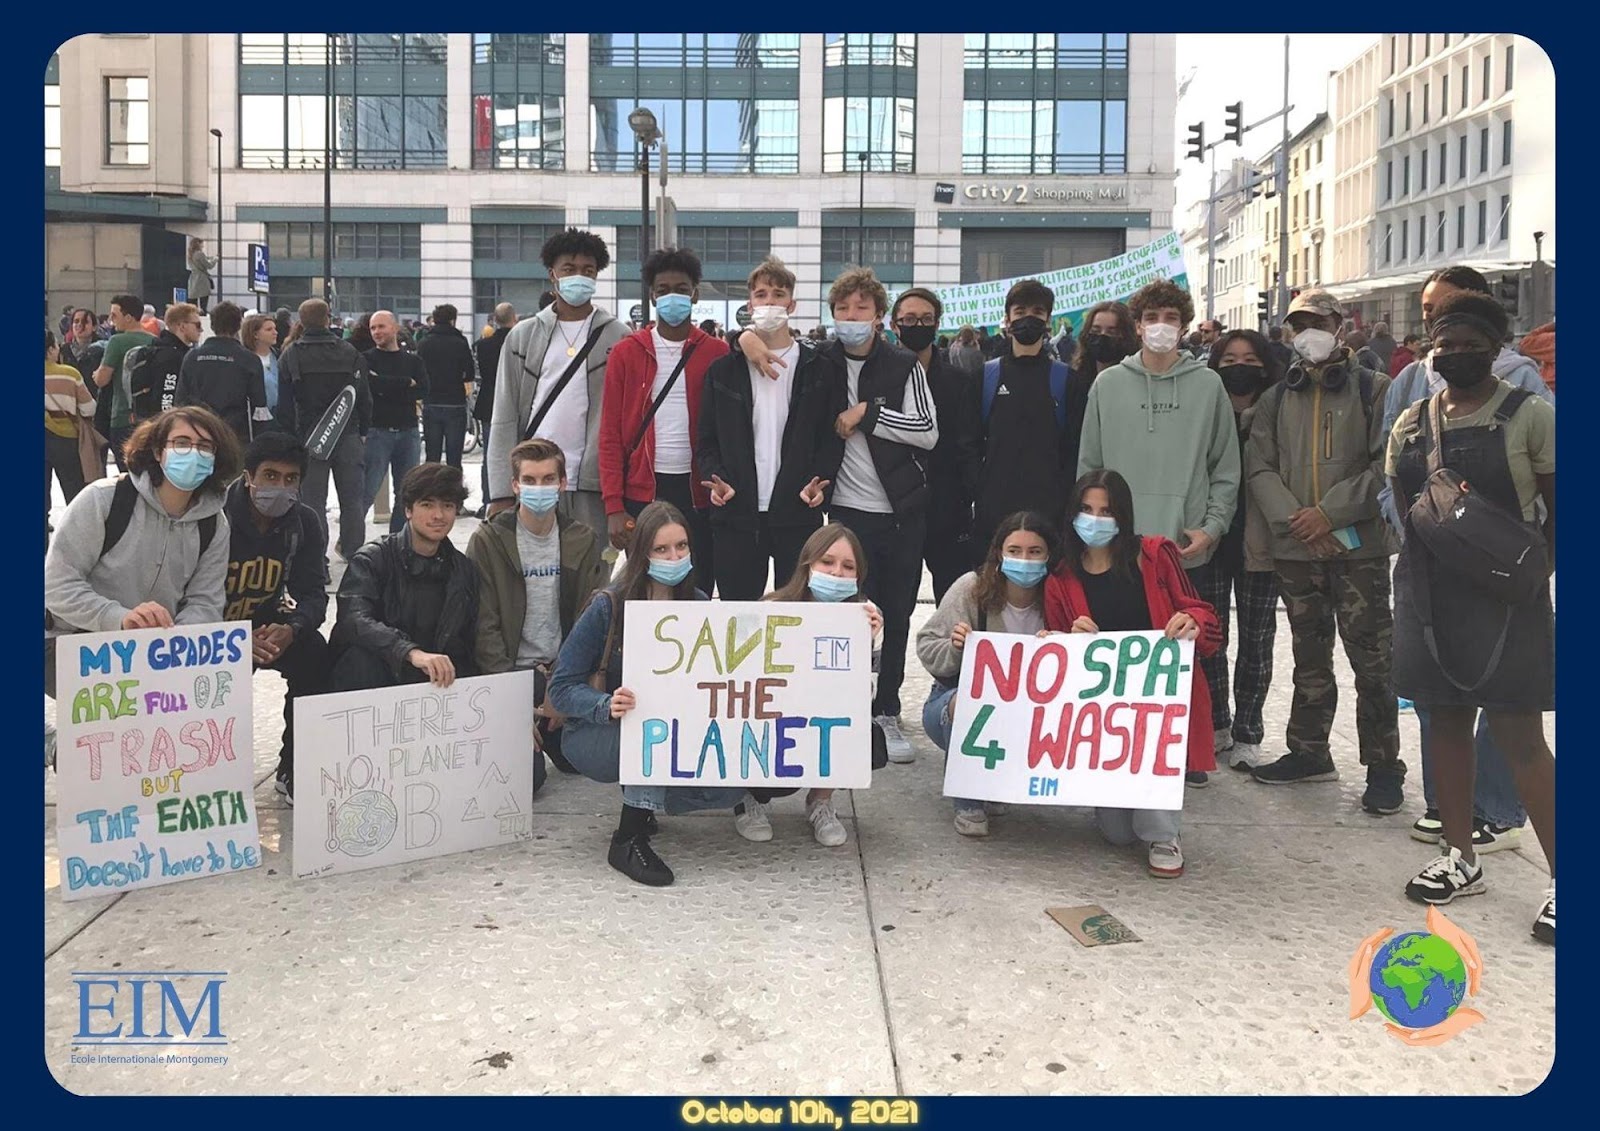 “The way we demonstrated our engagement with the climate crisis was through the march as a way to raise awareness. We prepared posters that acted as our own personal voice and statement with regards to the crisis.” - Rushil DP1